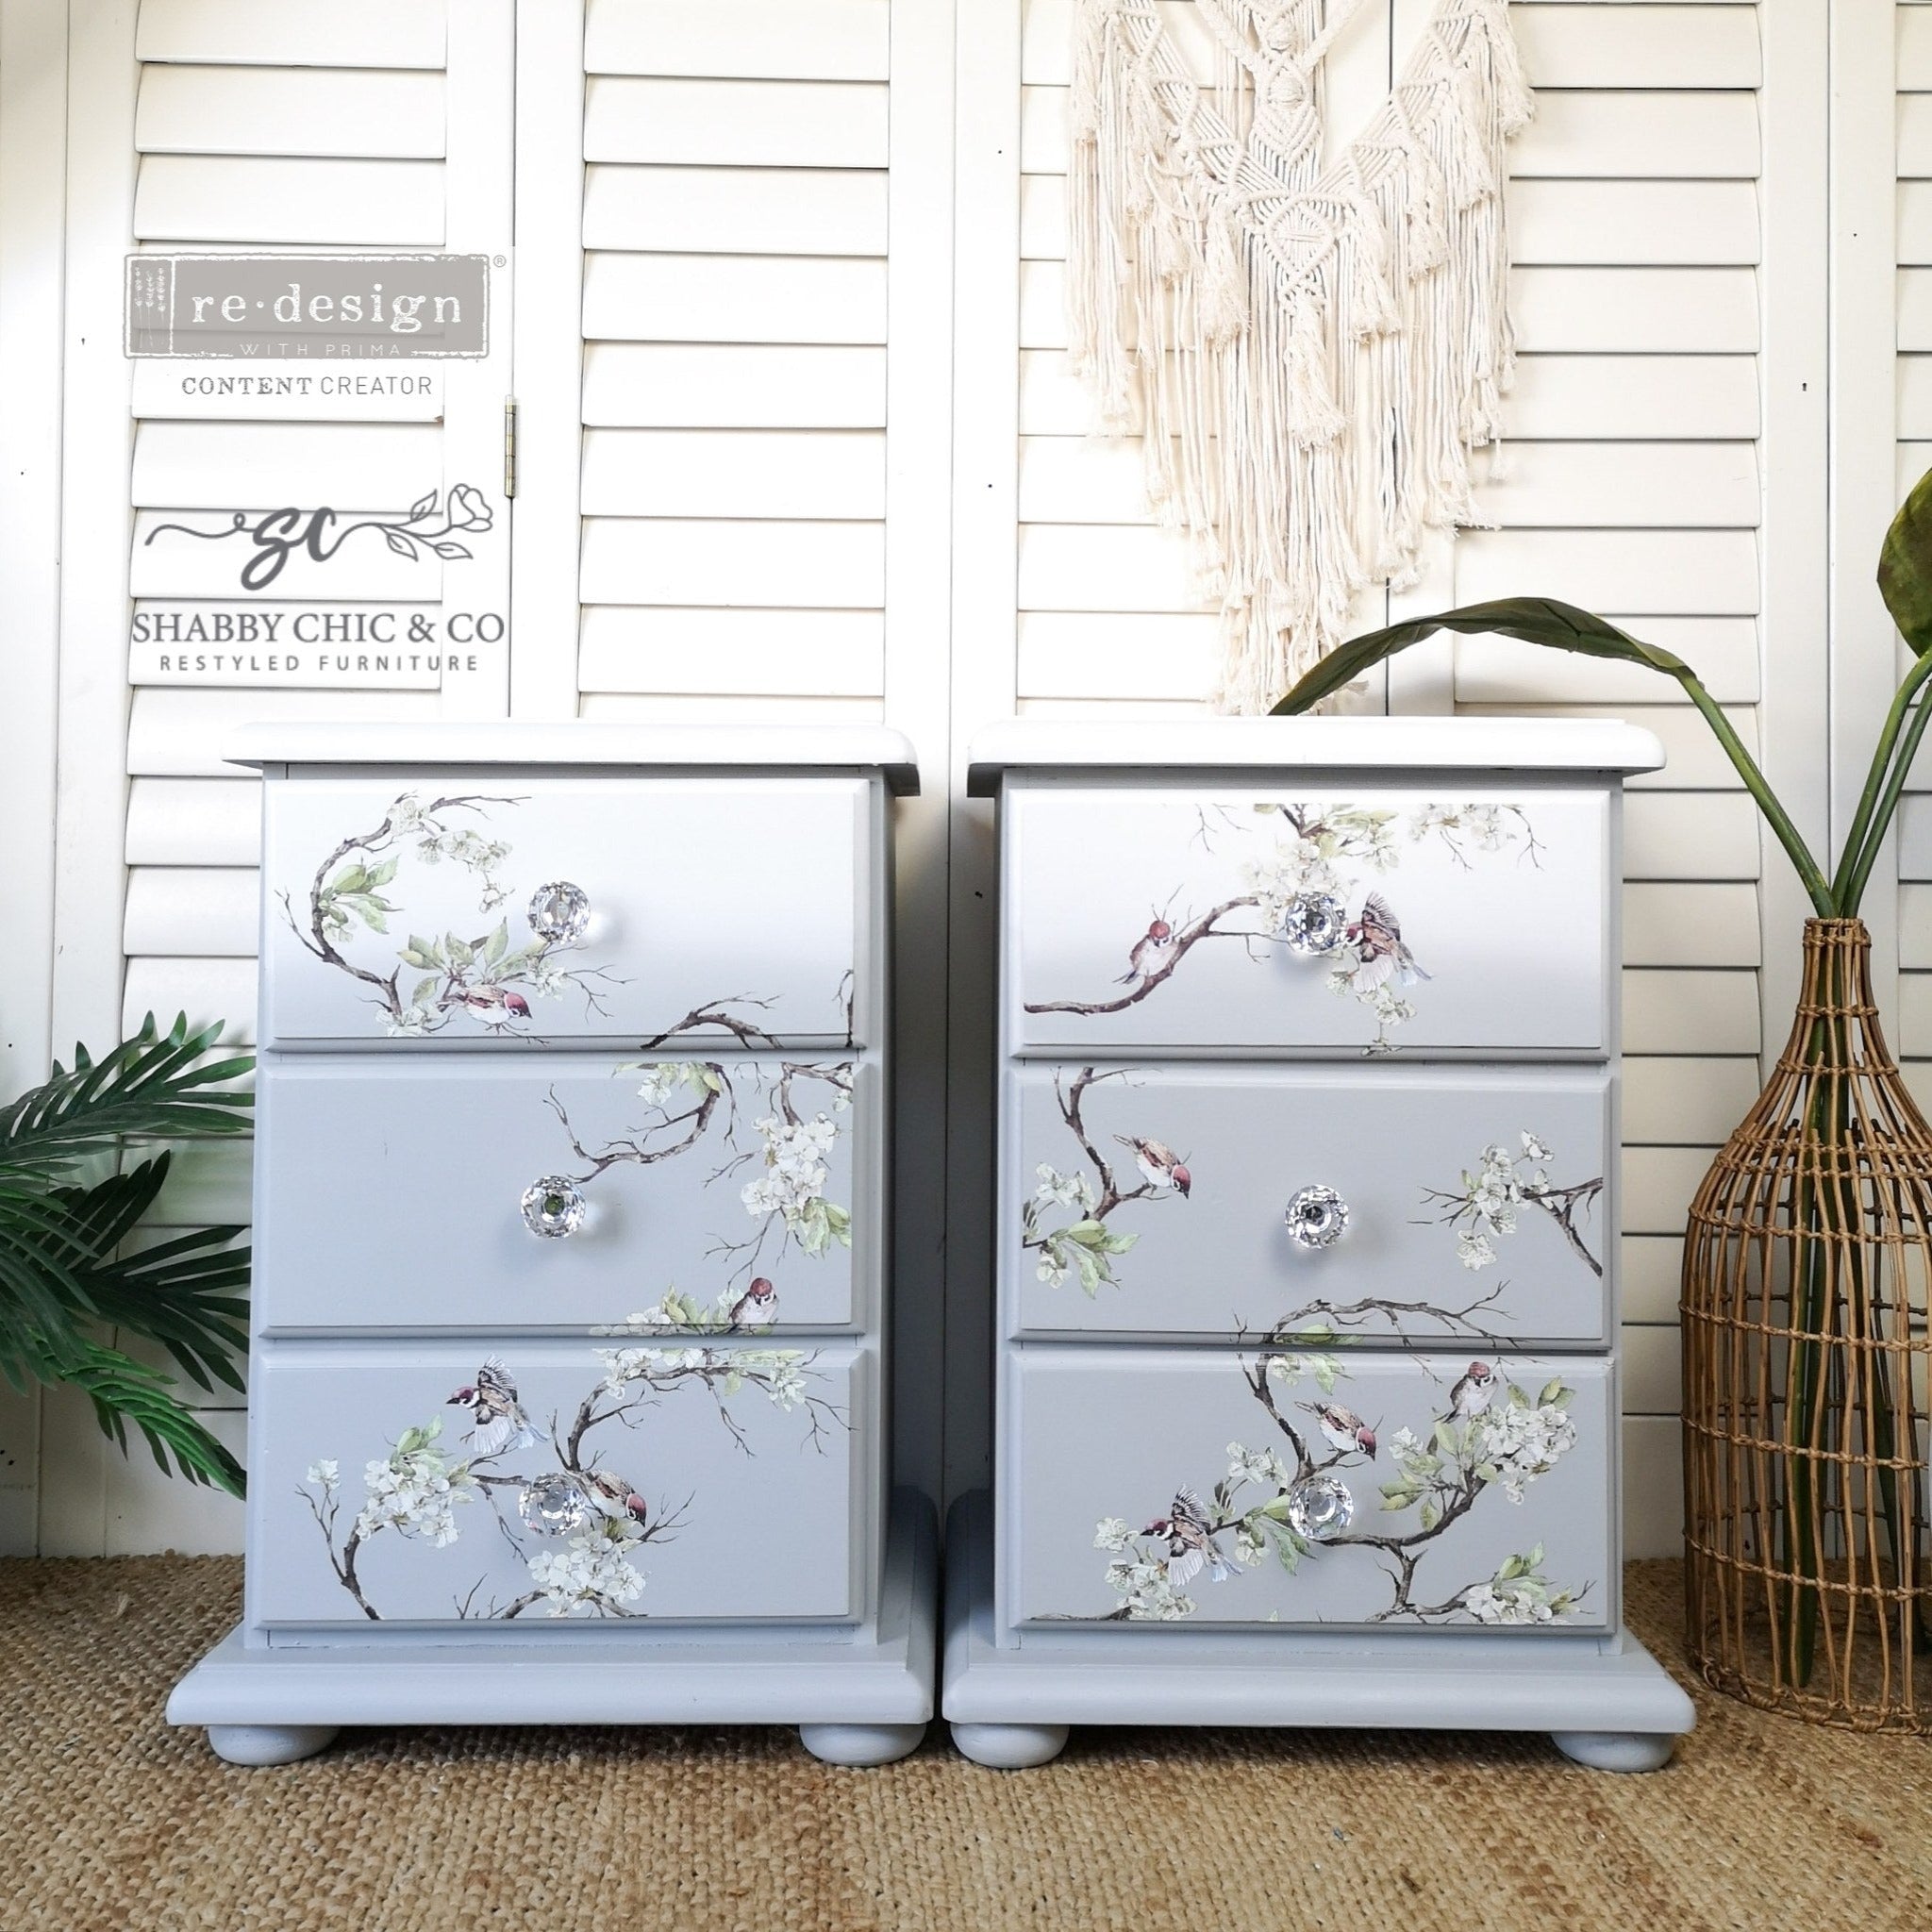 Two 3-drawer nightstands refurbished by Shabby Chic & Co. are painted an ombre blend of white down to light grey and feature ReDesign with Prima's Blossom Flight transfer on the drawers.